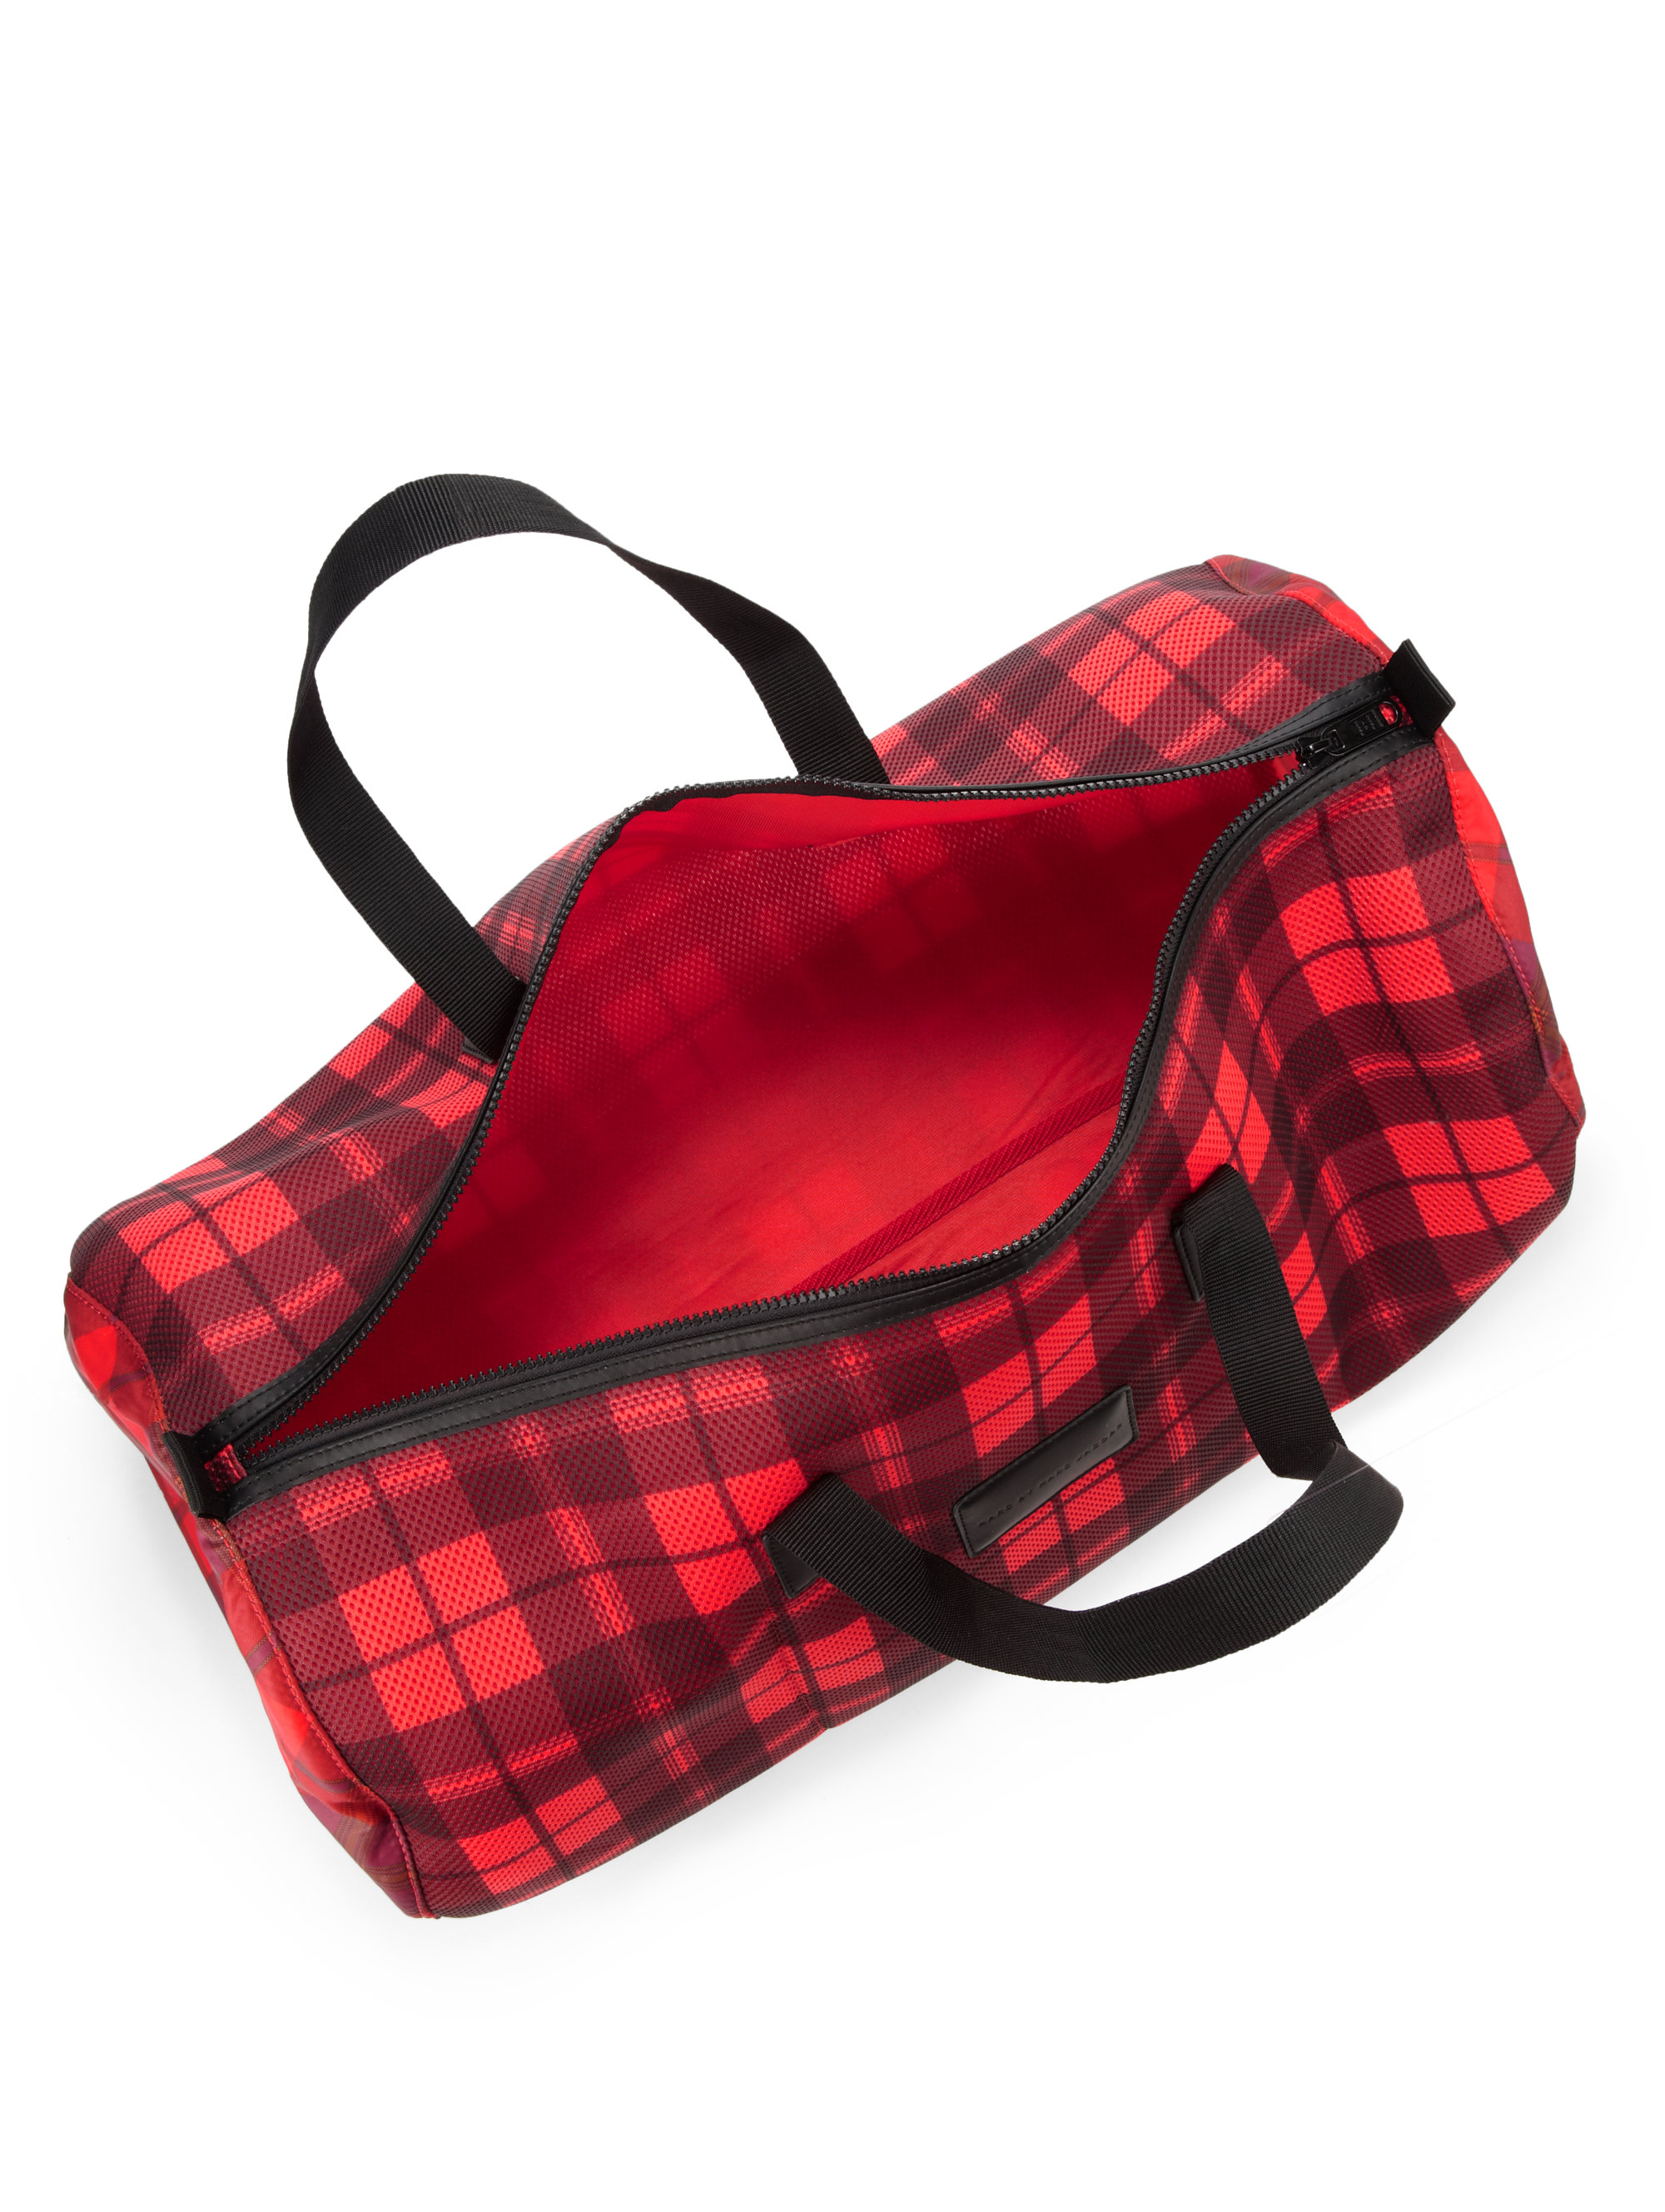 Marc By Marc Jacobs Plaid Duffle Bag in Red for Men - Lyst